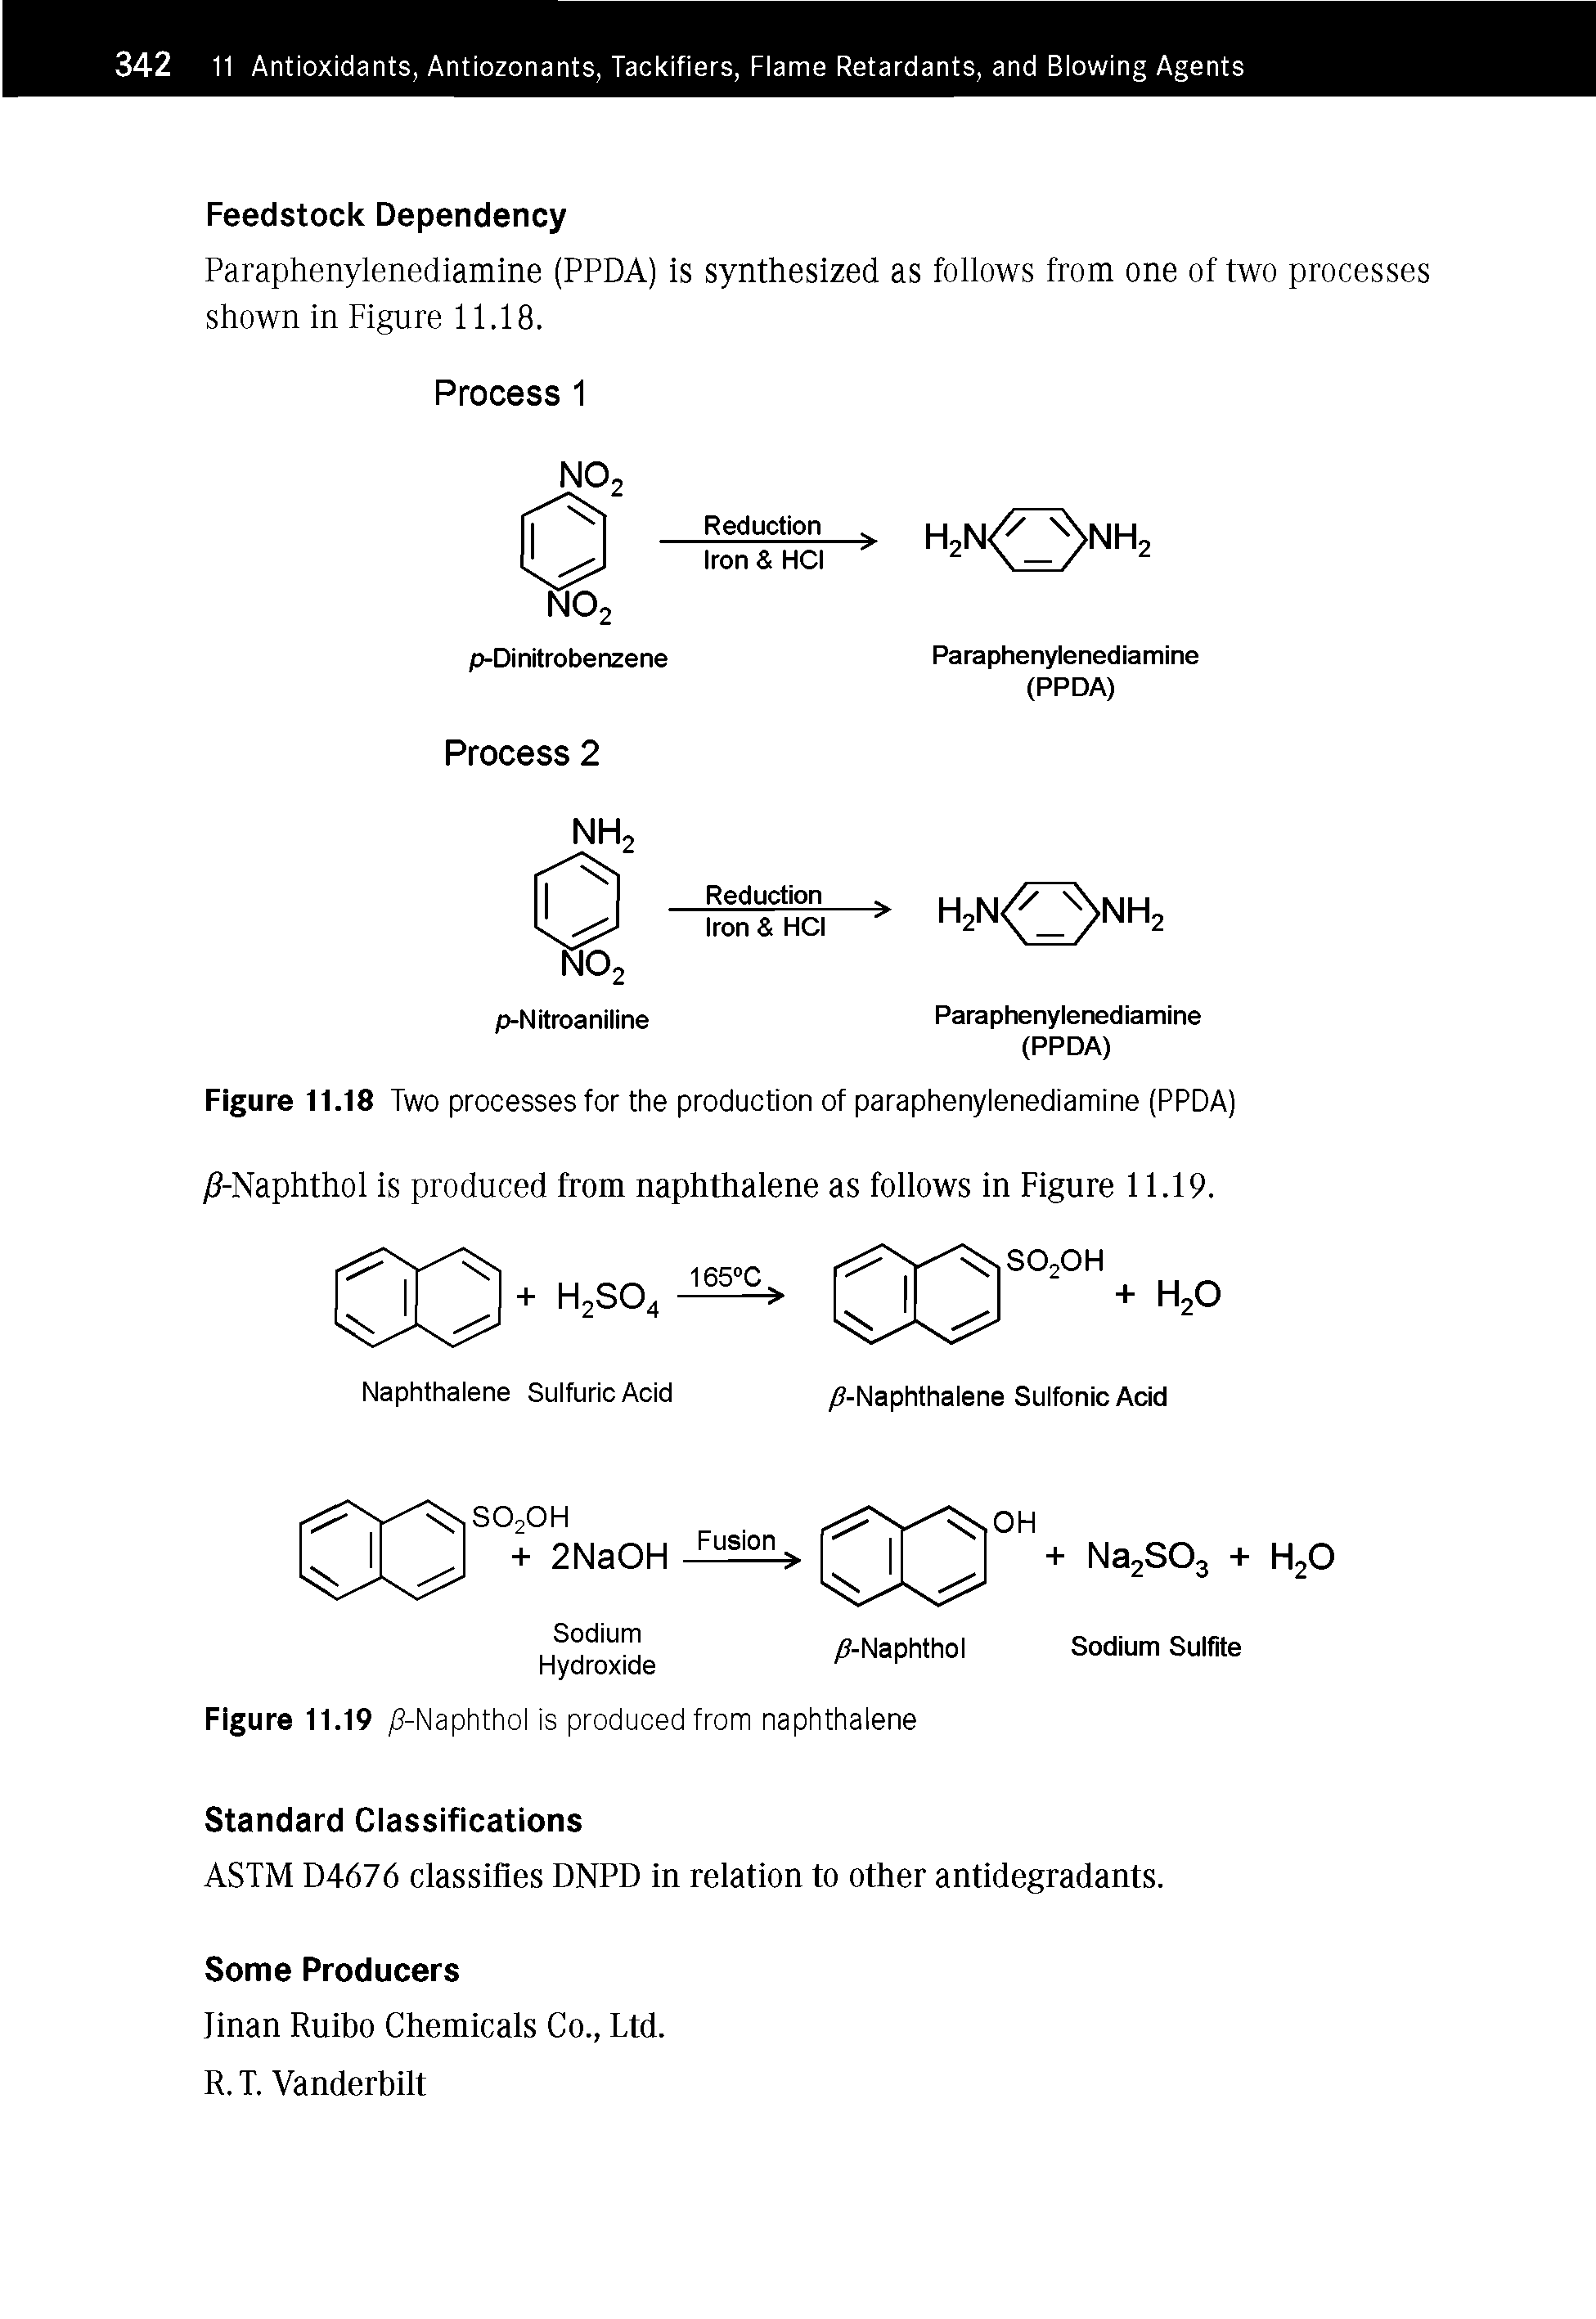 Figure 11.18 Two processes for the production of paraphenylenediamine (PPDA) jS-Naphthol is produced from naphthalene as follows in Figure 11.19.